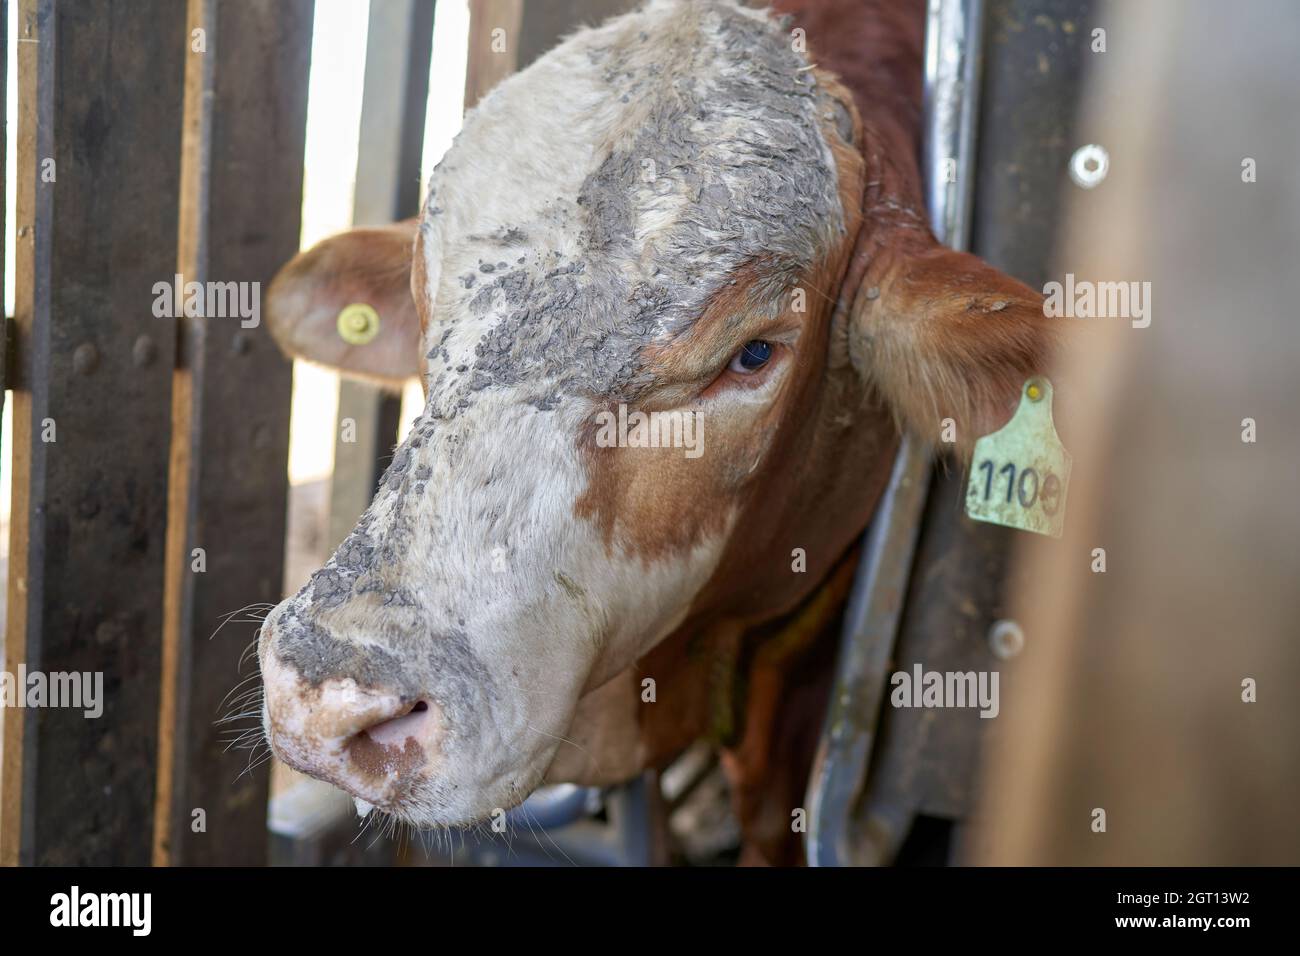 Cattle rancher tagging cow Stock Photo